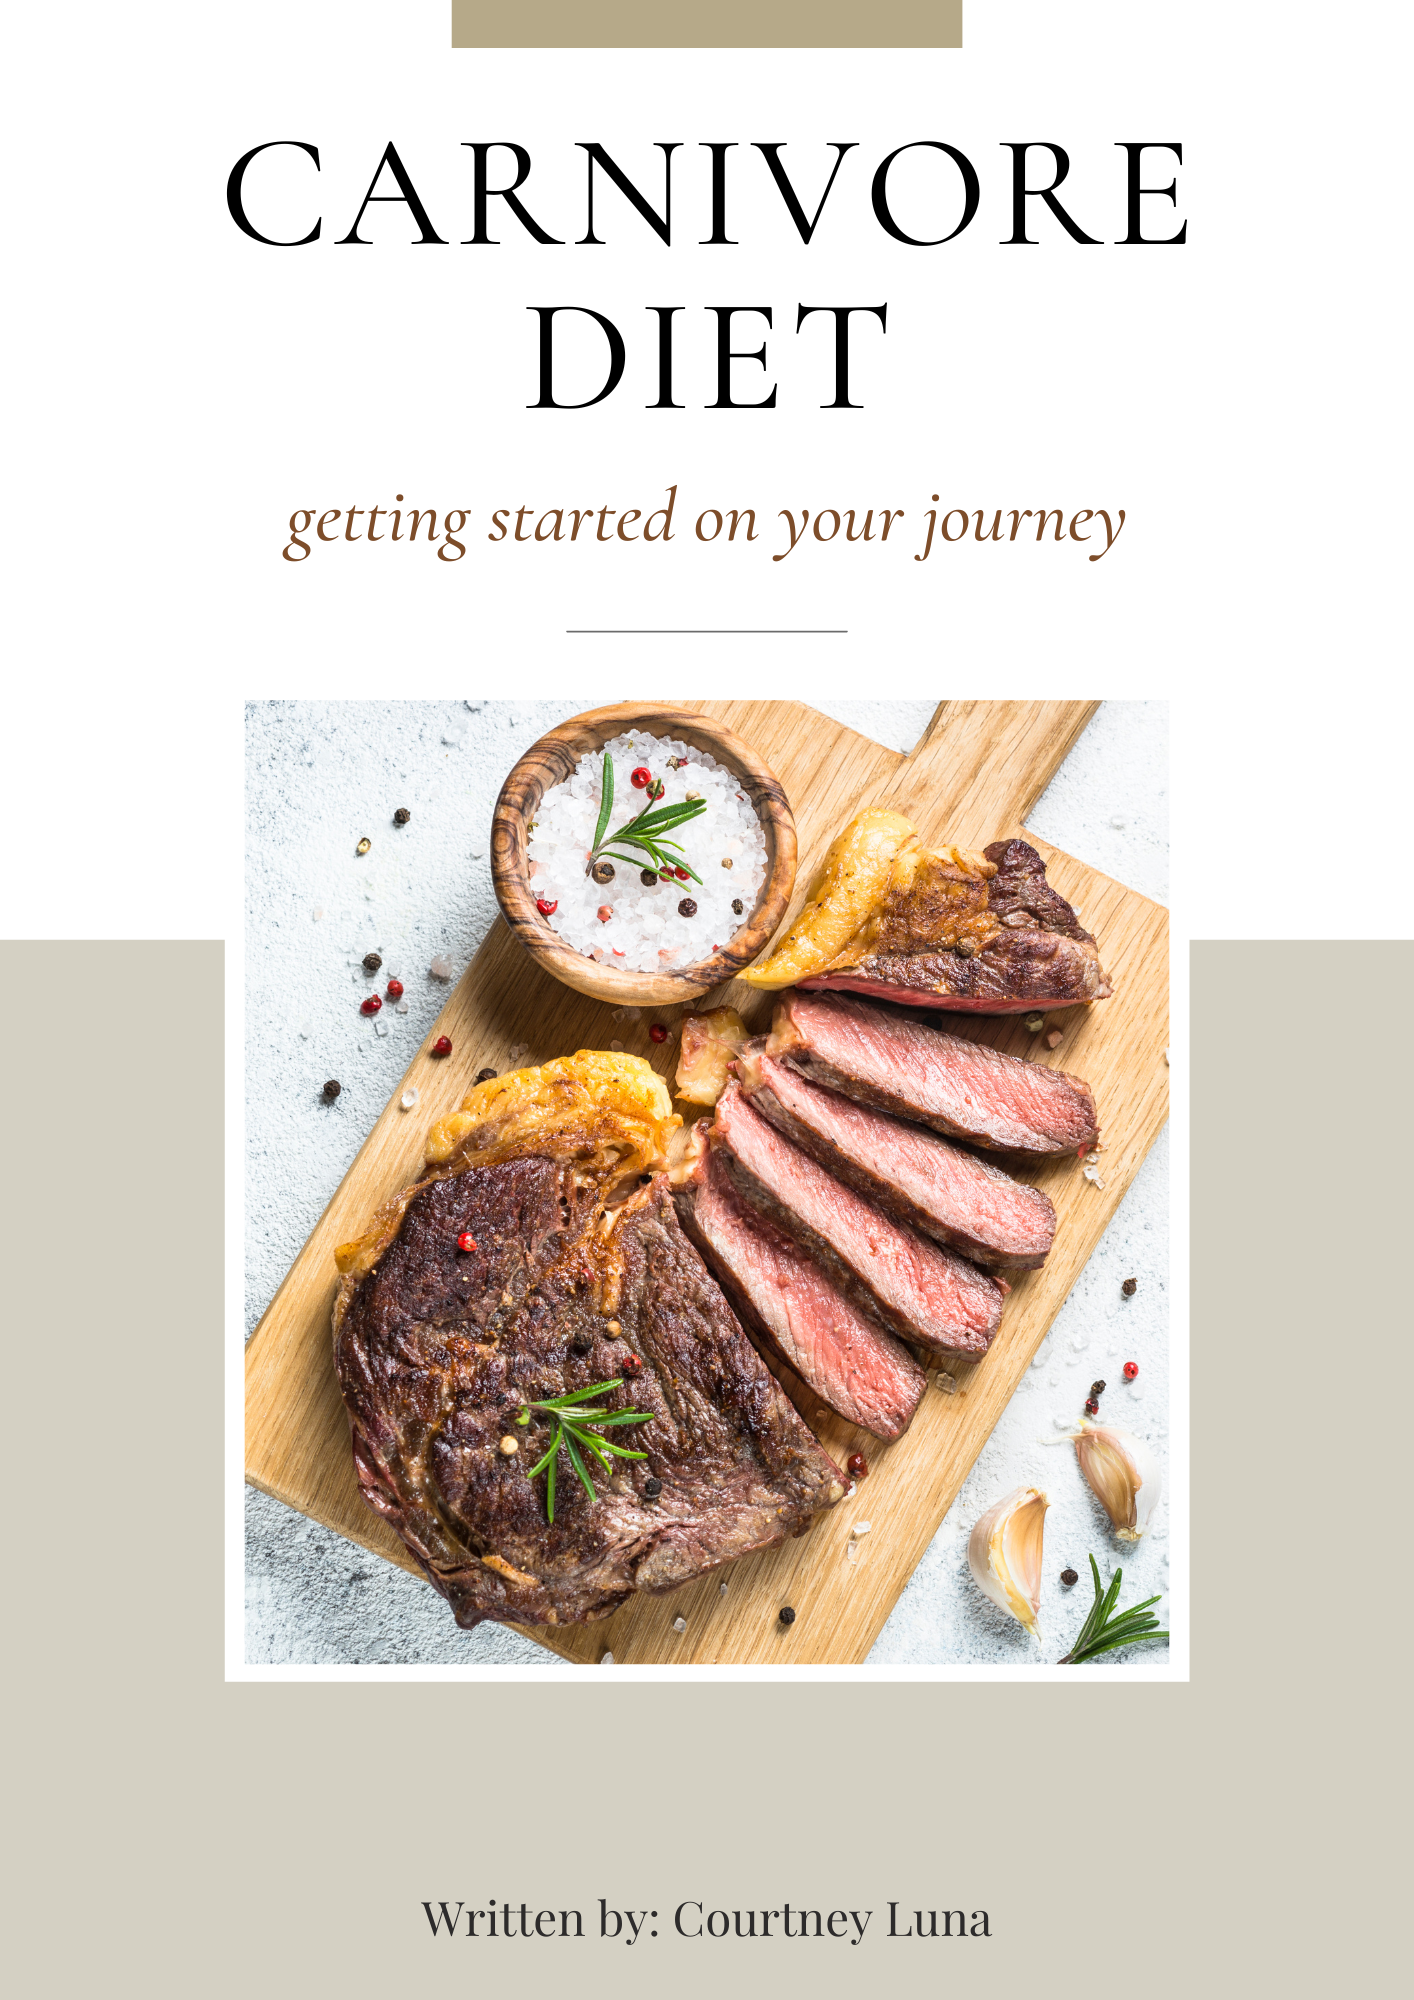 Carnivore Diet: getting started on your journey